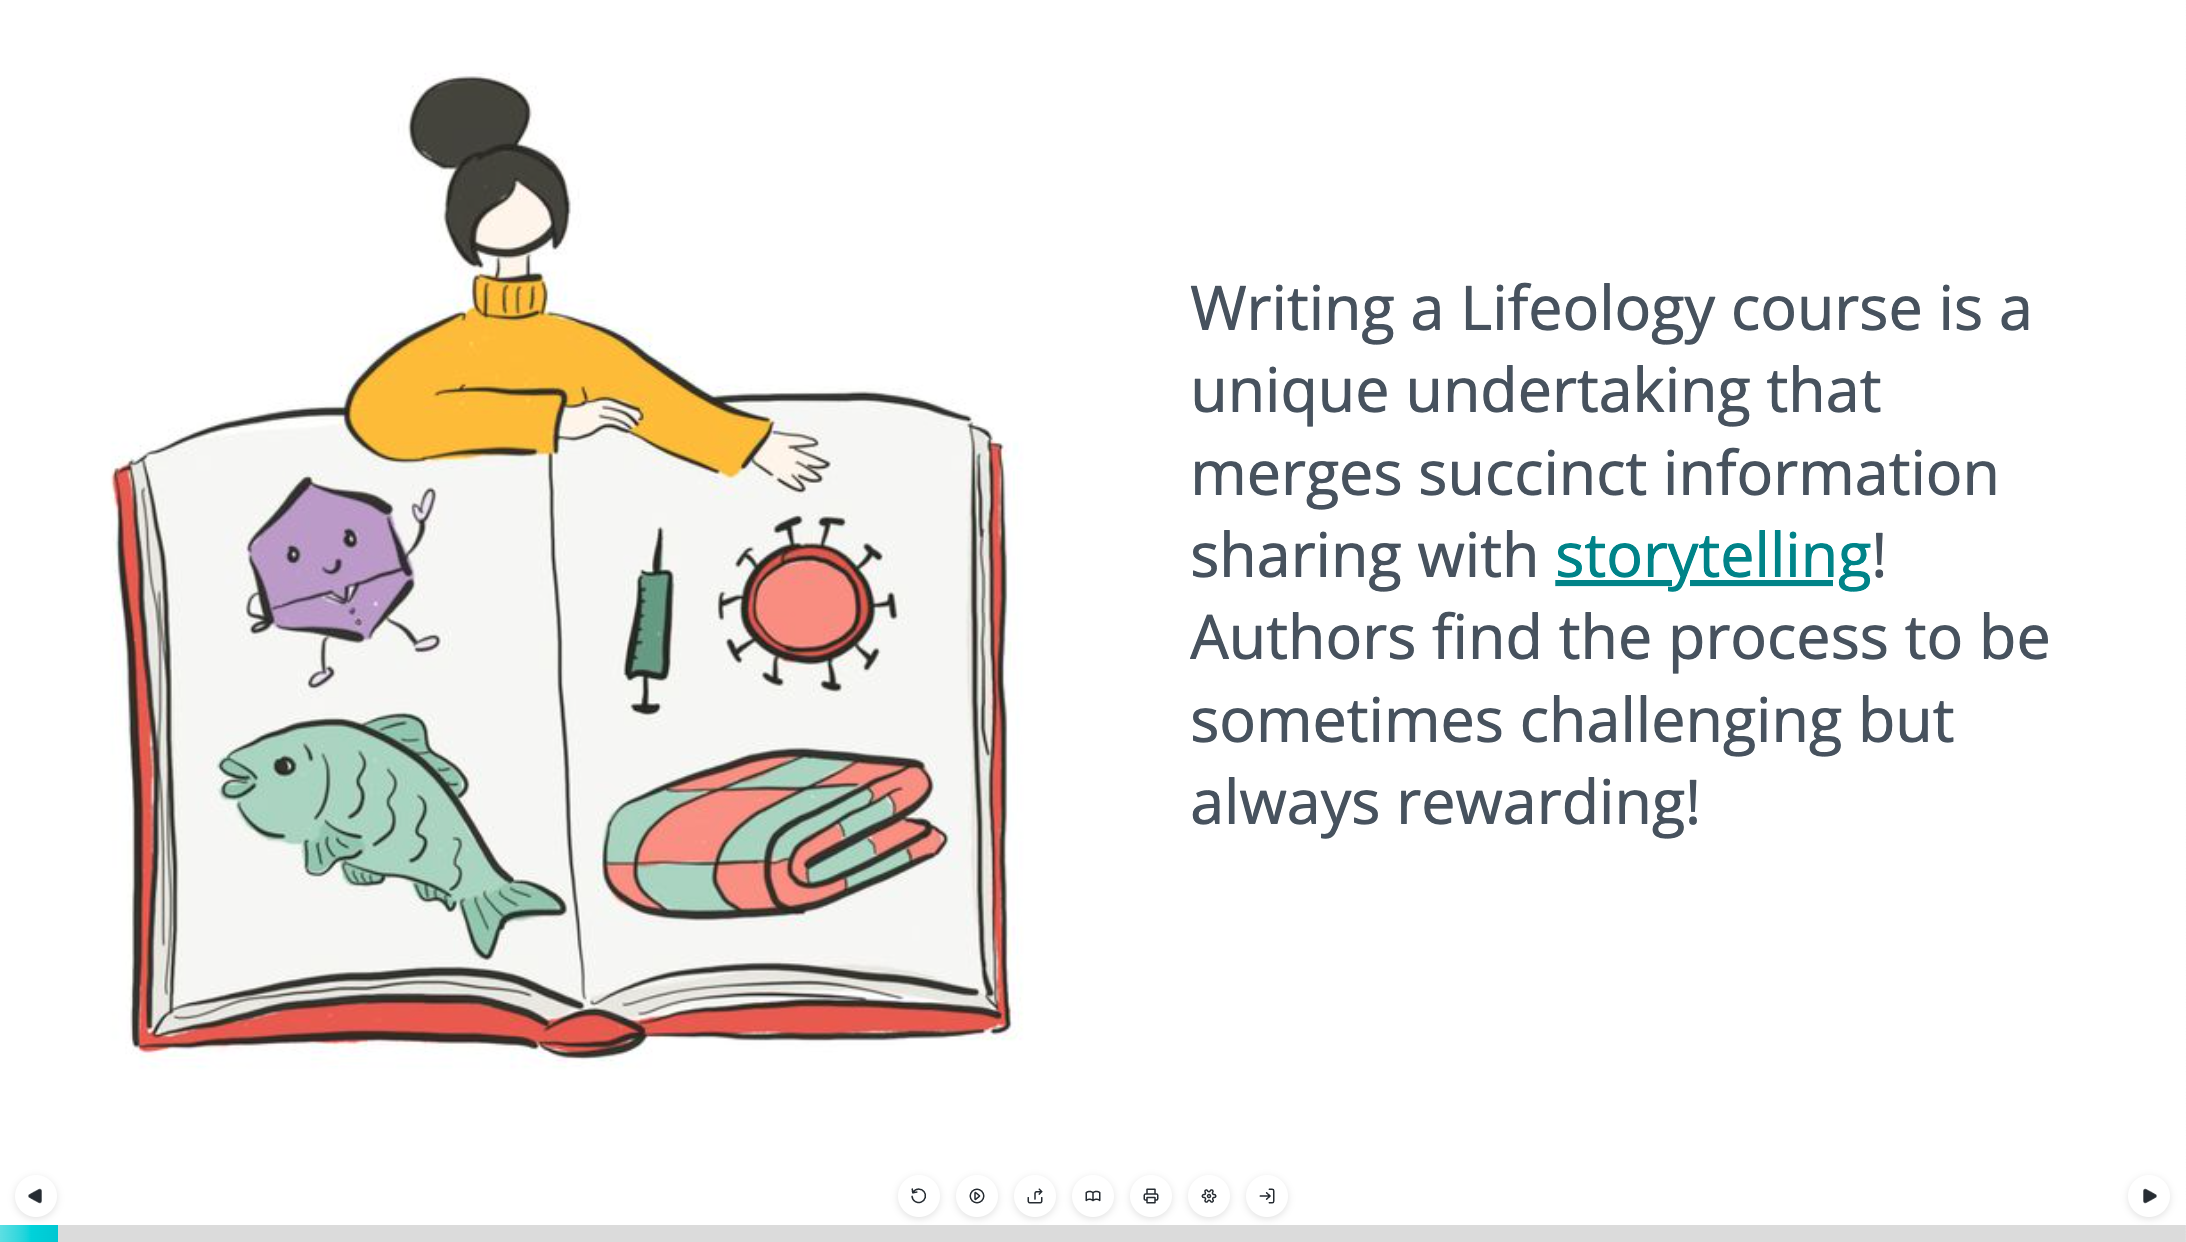 card from how to write a lifeology course - drawing of person showcasing book with various art - text discusses uniqueness of Lifeology course with succinct information combined with storytelling - a challenging but rewarding process